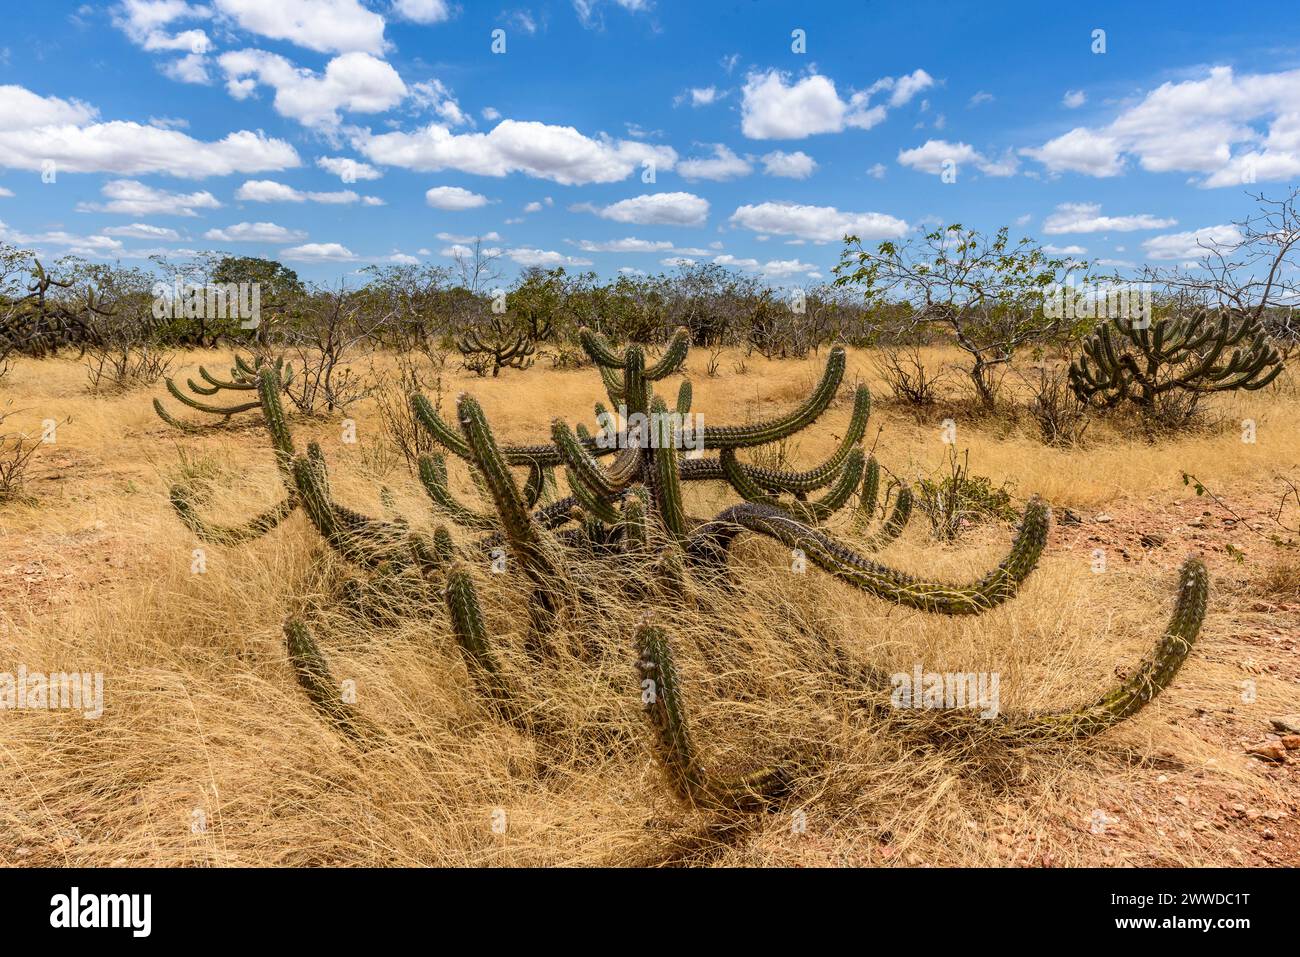 Brazilian biome Caatinga, typical vegetation with xique-xique cactus in the State of Paraíba, Brazil. Stock Photo